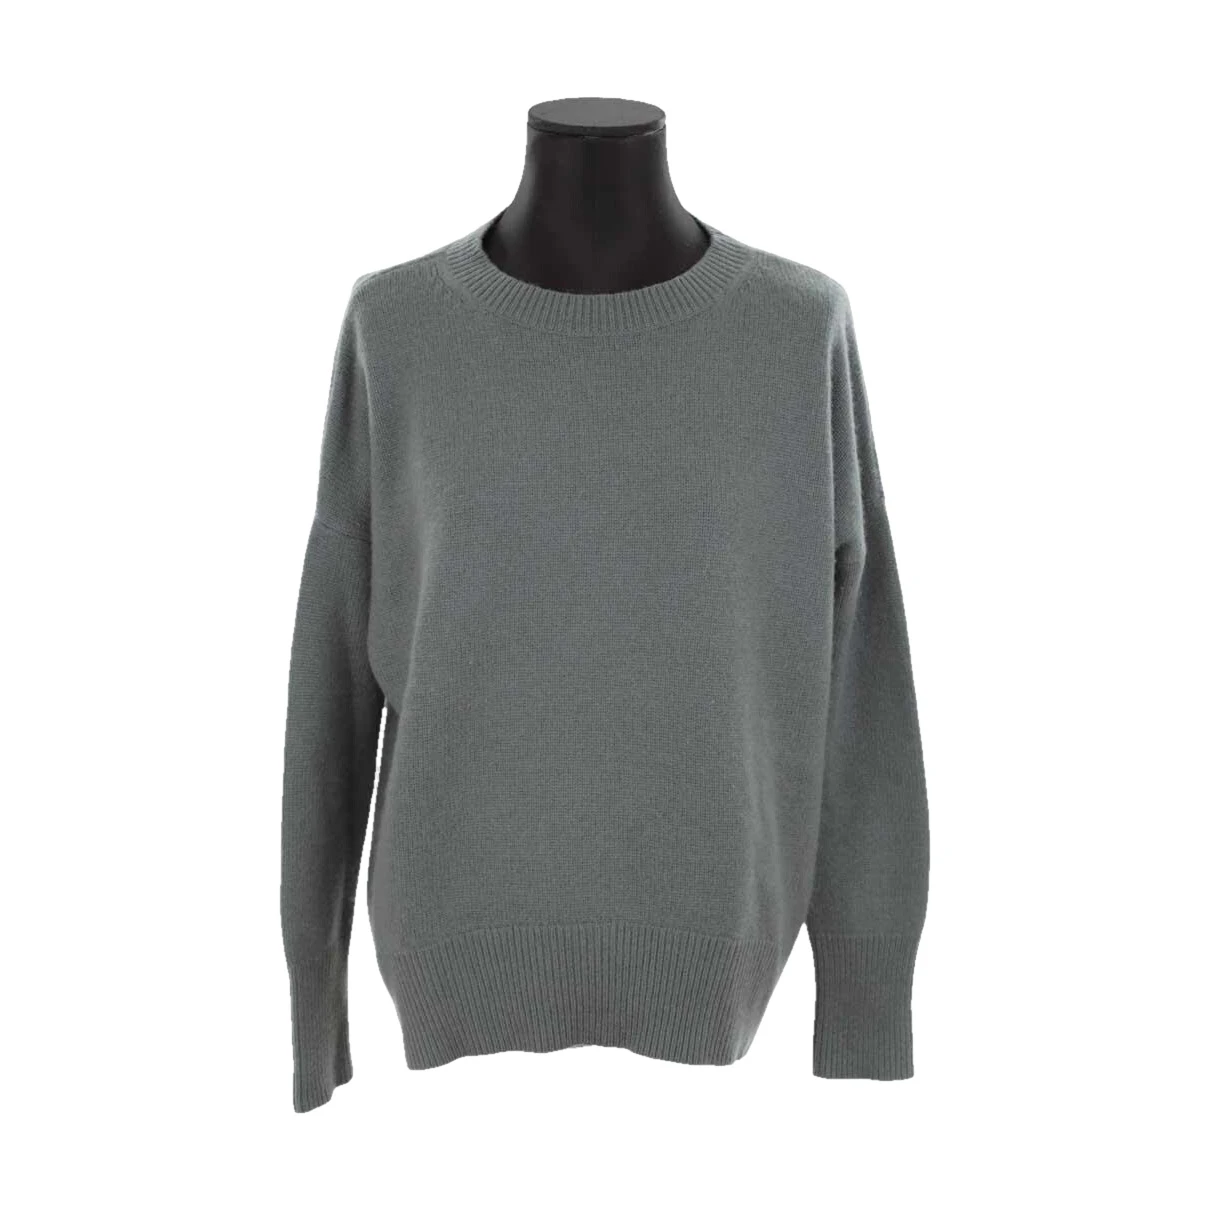 Pre-owned Theory Cashmere Jumper In Green